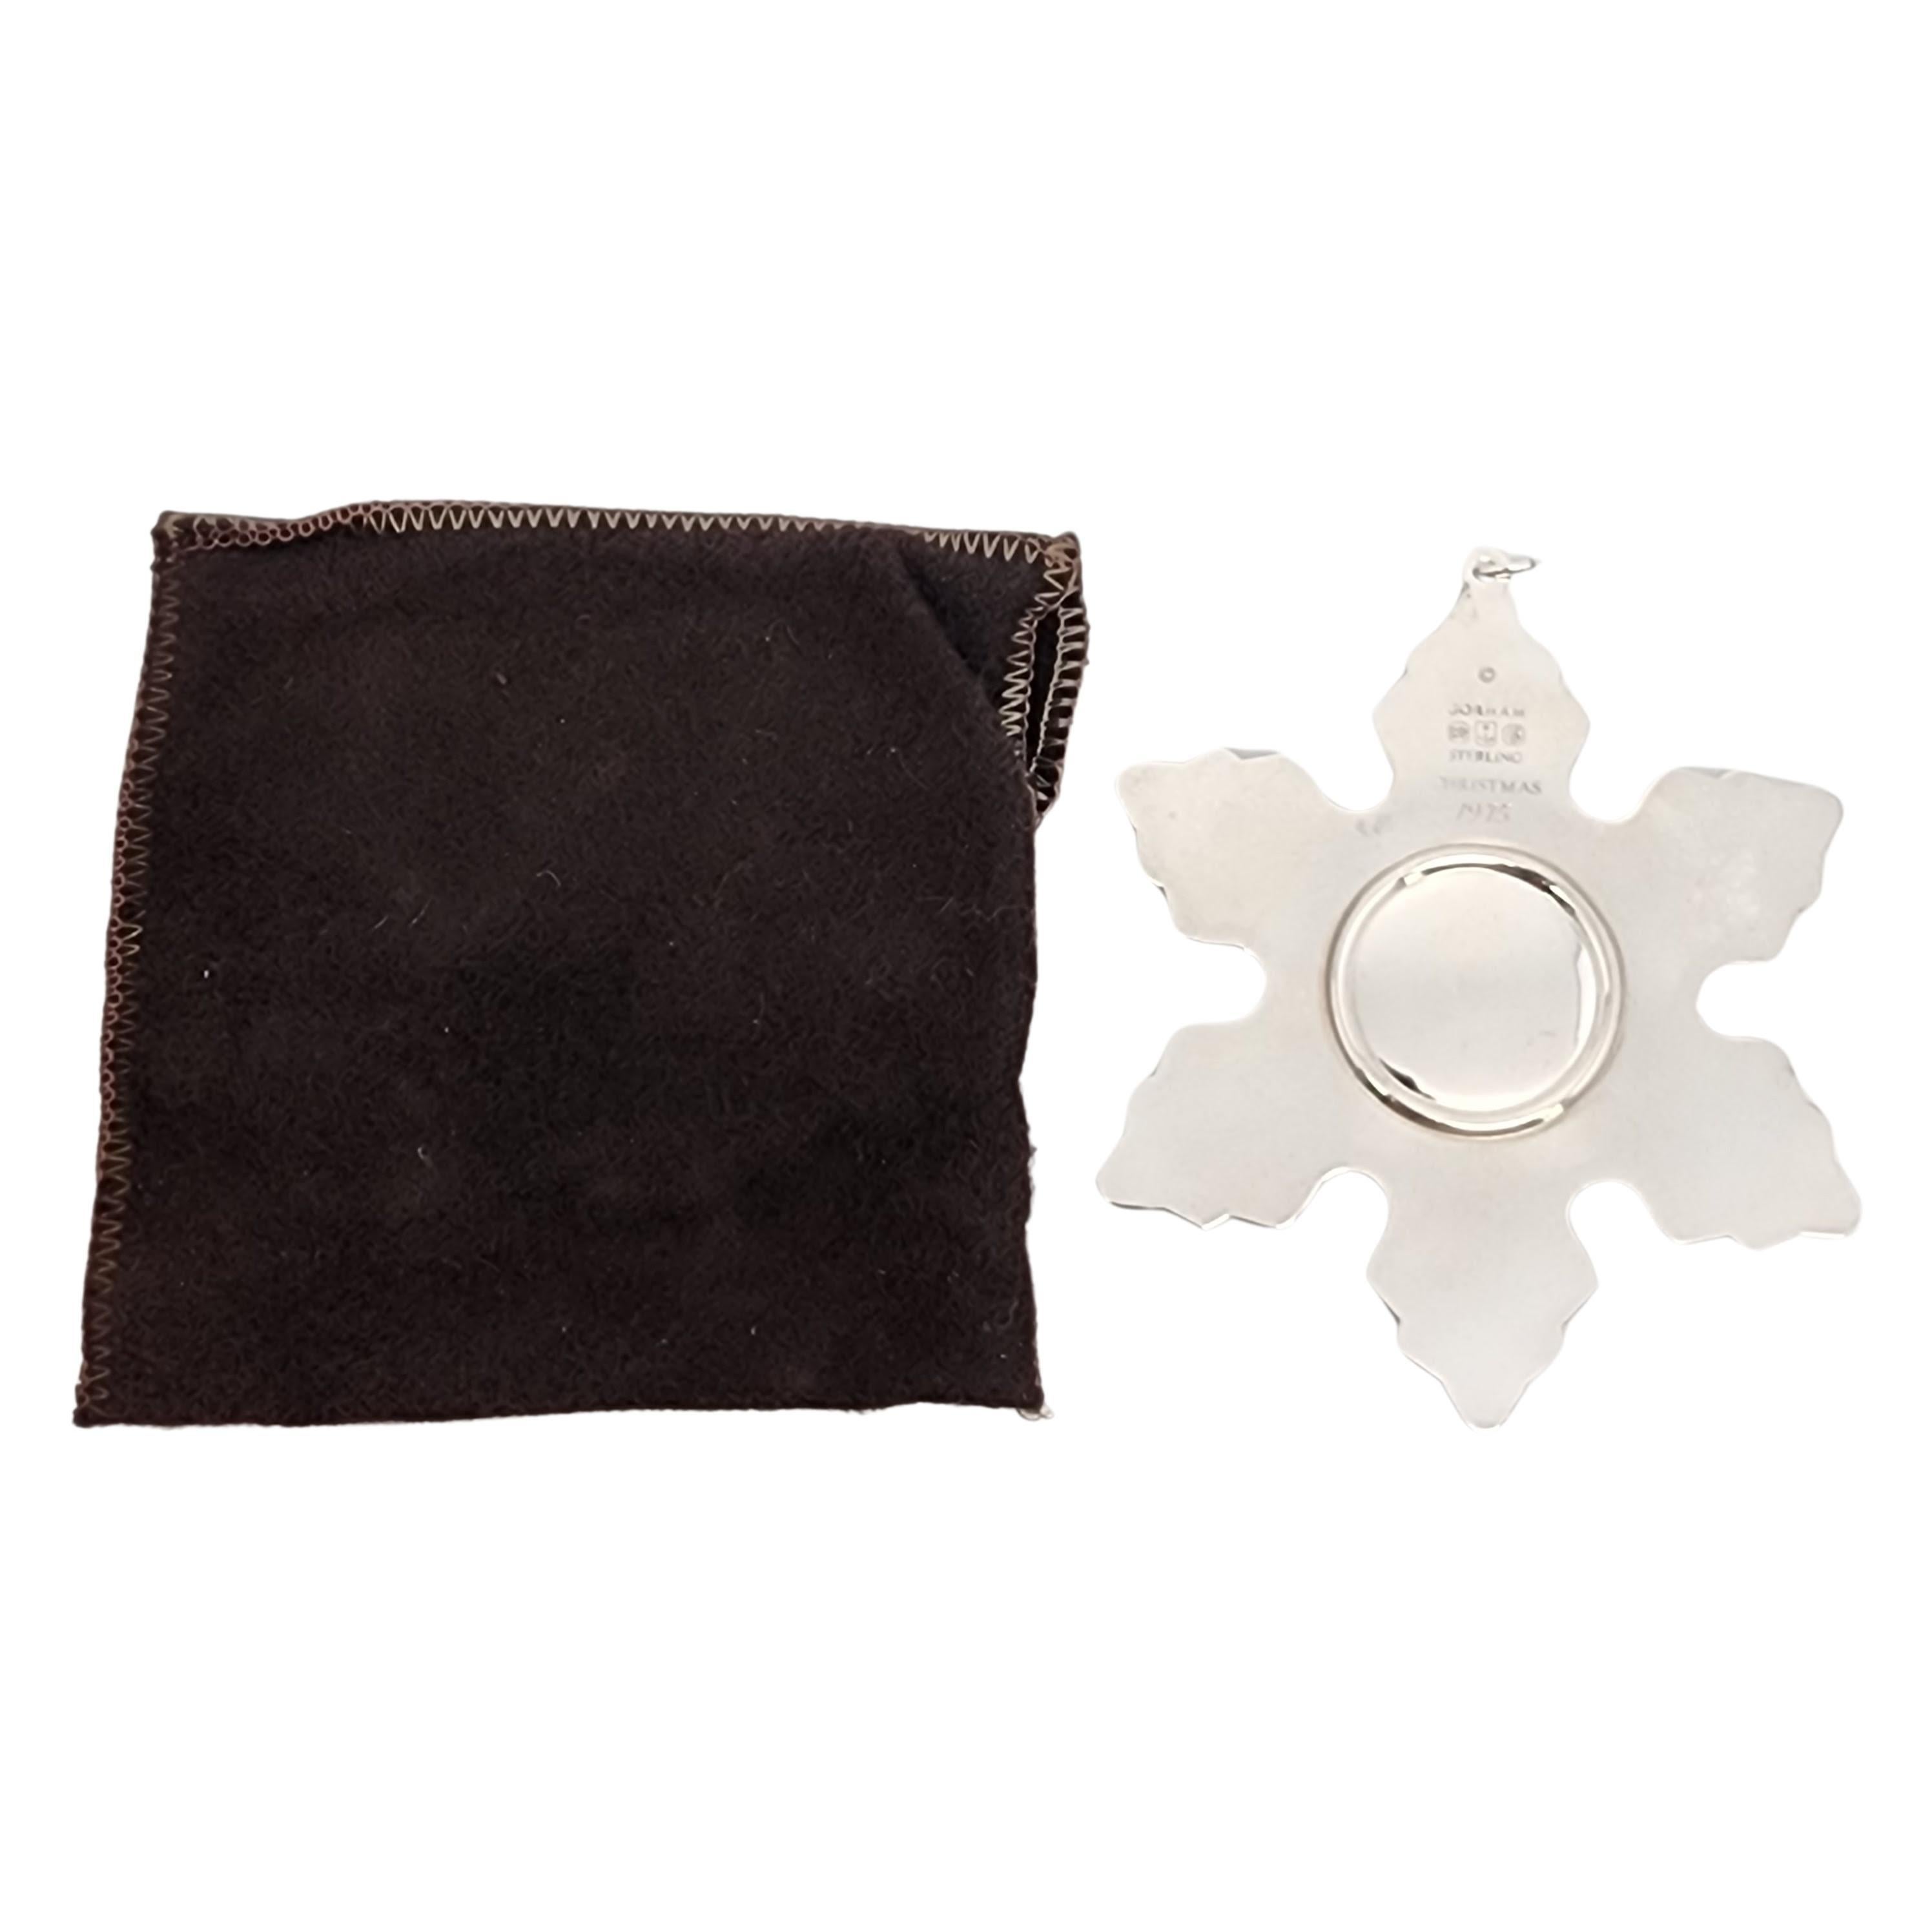 Gorham sterling silver snowflake ornament from 1975 with pouch.

Since 1970, Gorham has been celebrating the season with a yearly version of the classic snowflake form, creating a beautiful tradition of sparkling art. Includes original Gorham felt